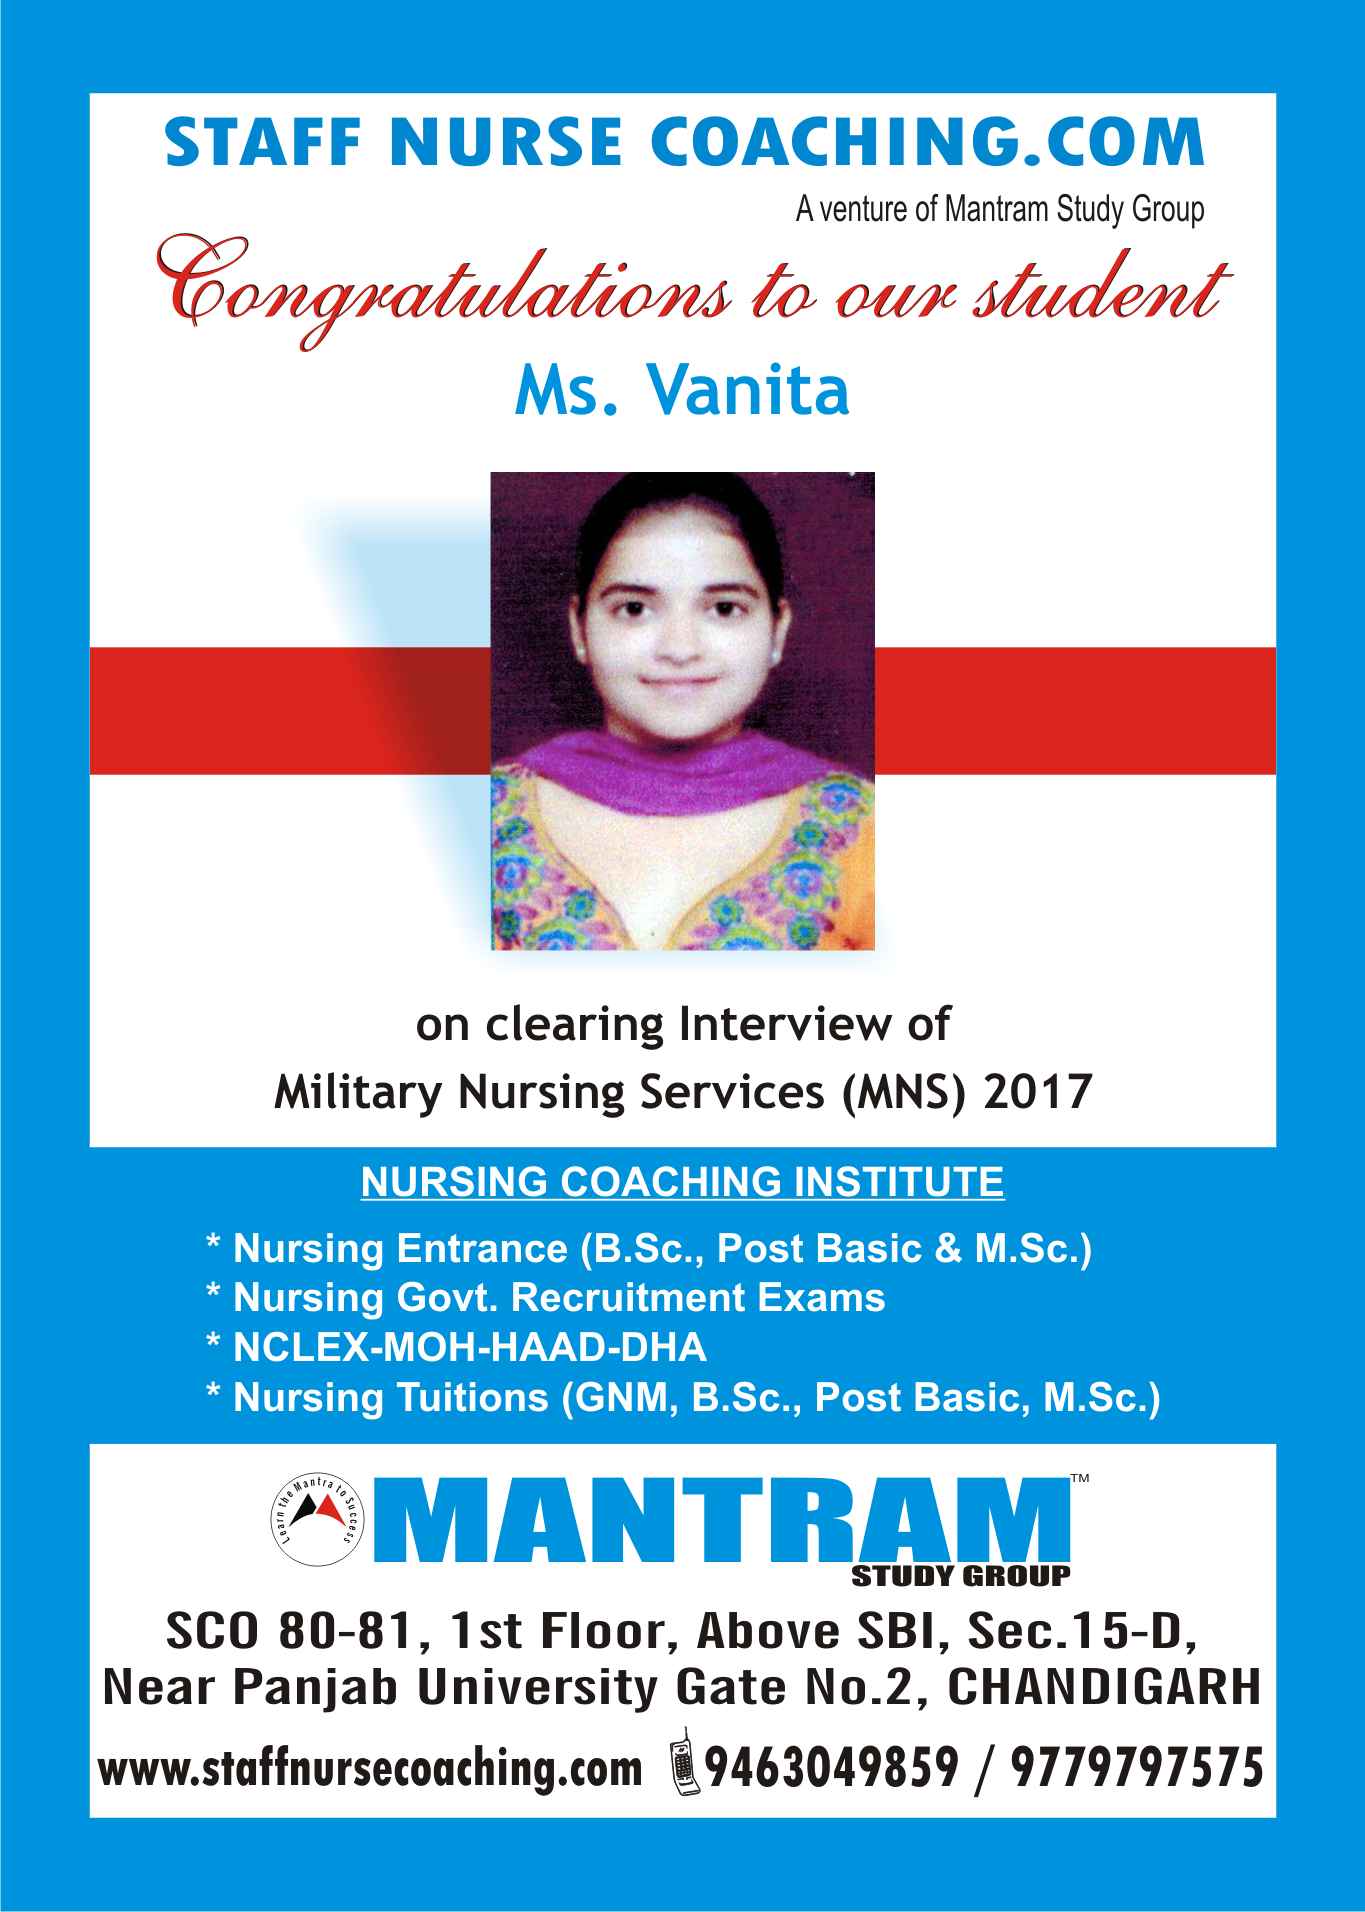 Regarding MNS interview our student Ms. Vanita Sharma who cleared MNS Written Exam 2017 has shared her views of the MNS Interview